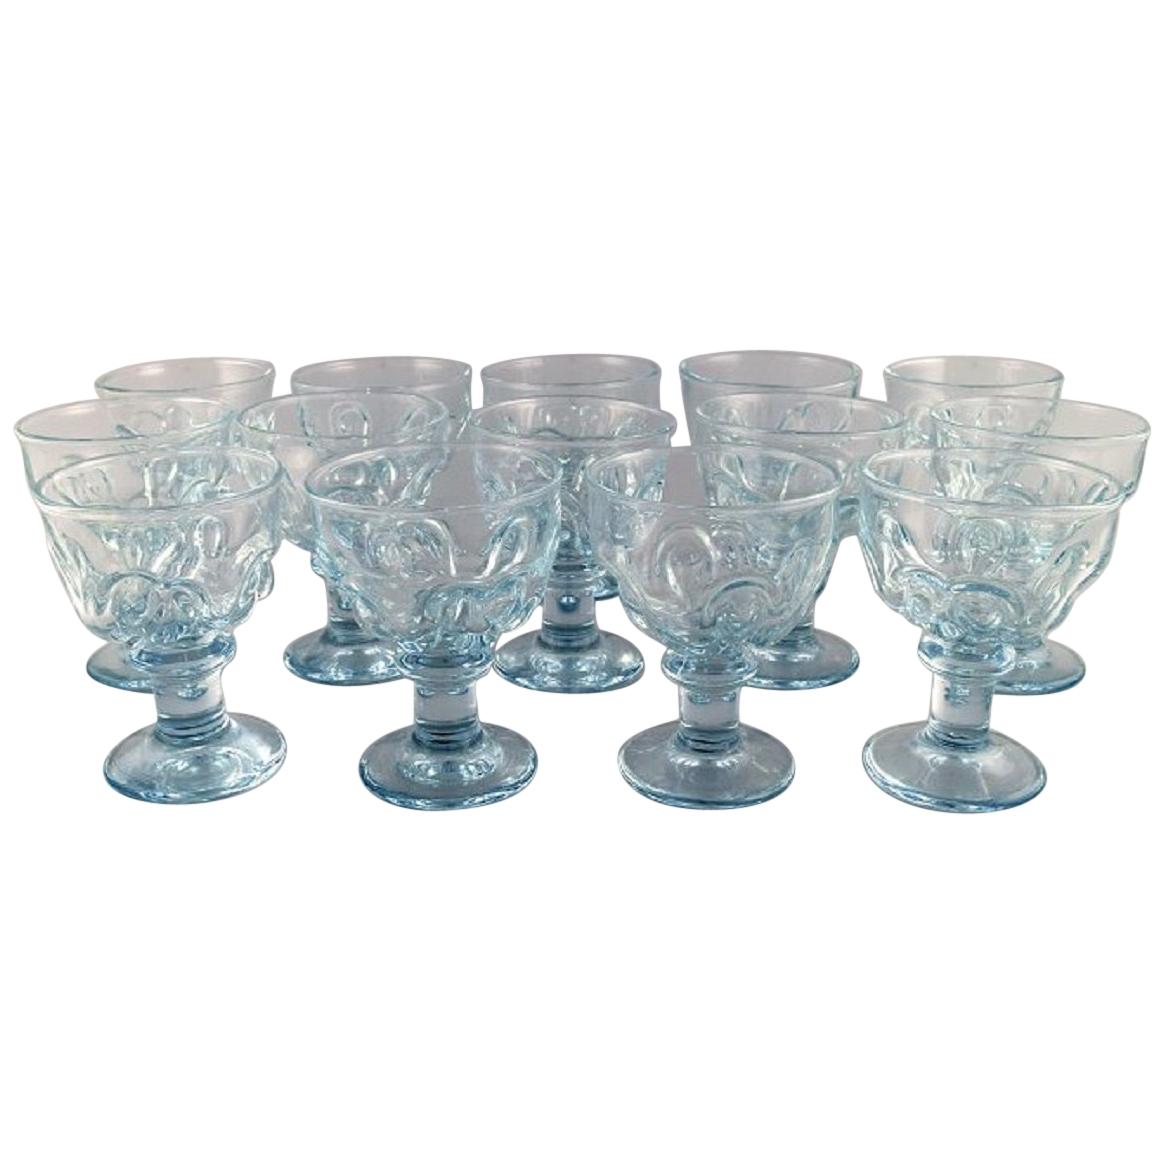 14 Large French Designer Glasses in Mouth Blown Art Glass, Mid-20th Century